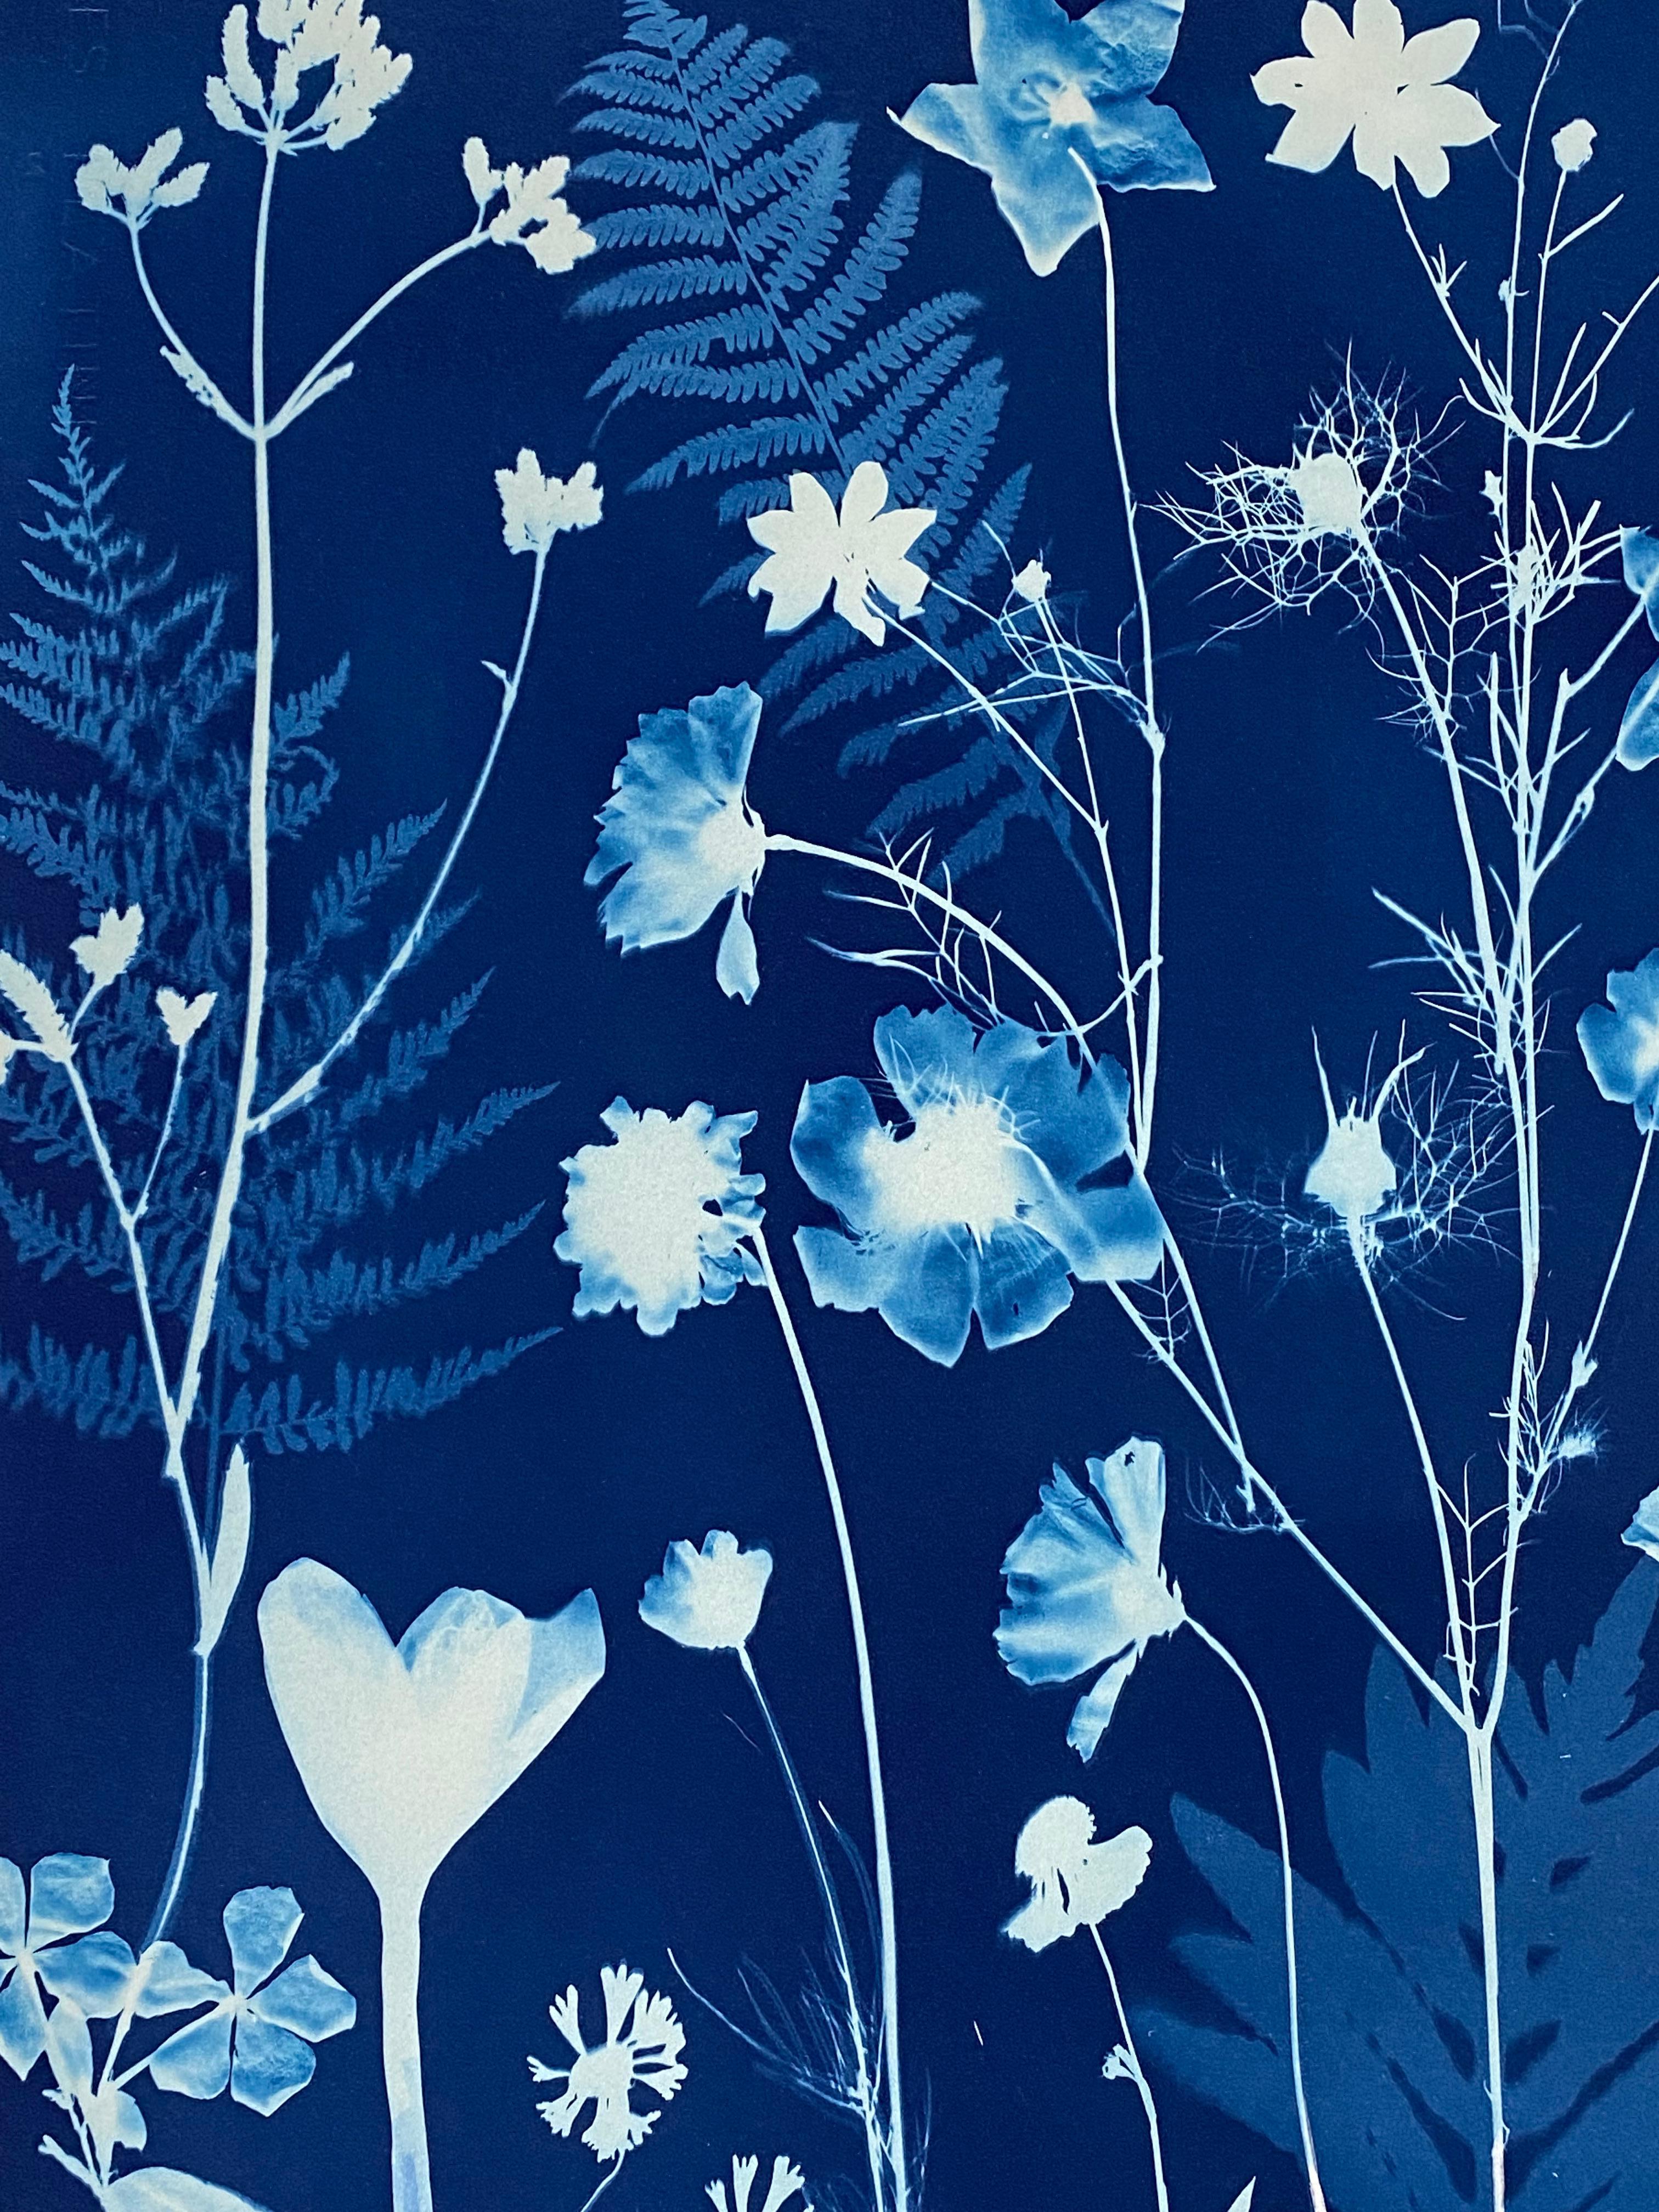 Cyanotype Painting Crocus, Star Flower, Cosmos, Ferns, Botanical Painting, Blue For Sale 4